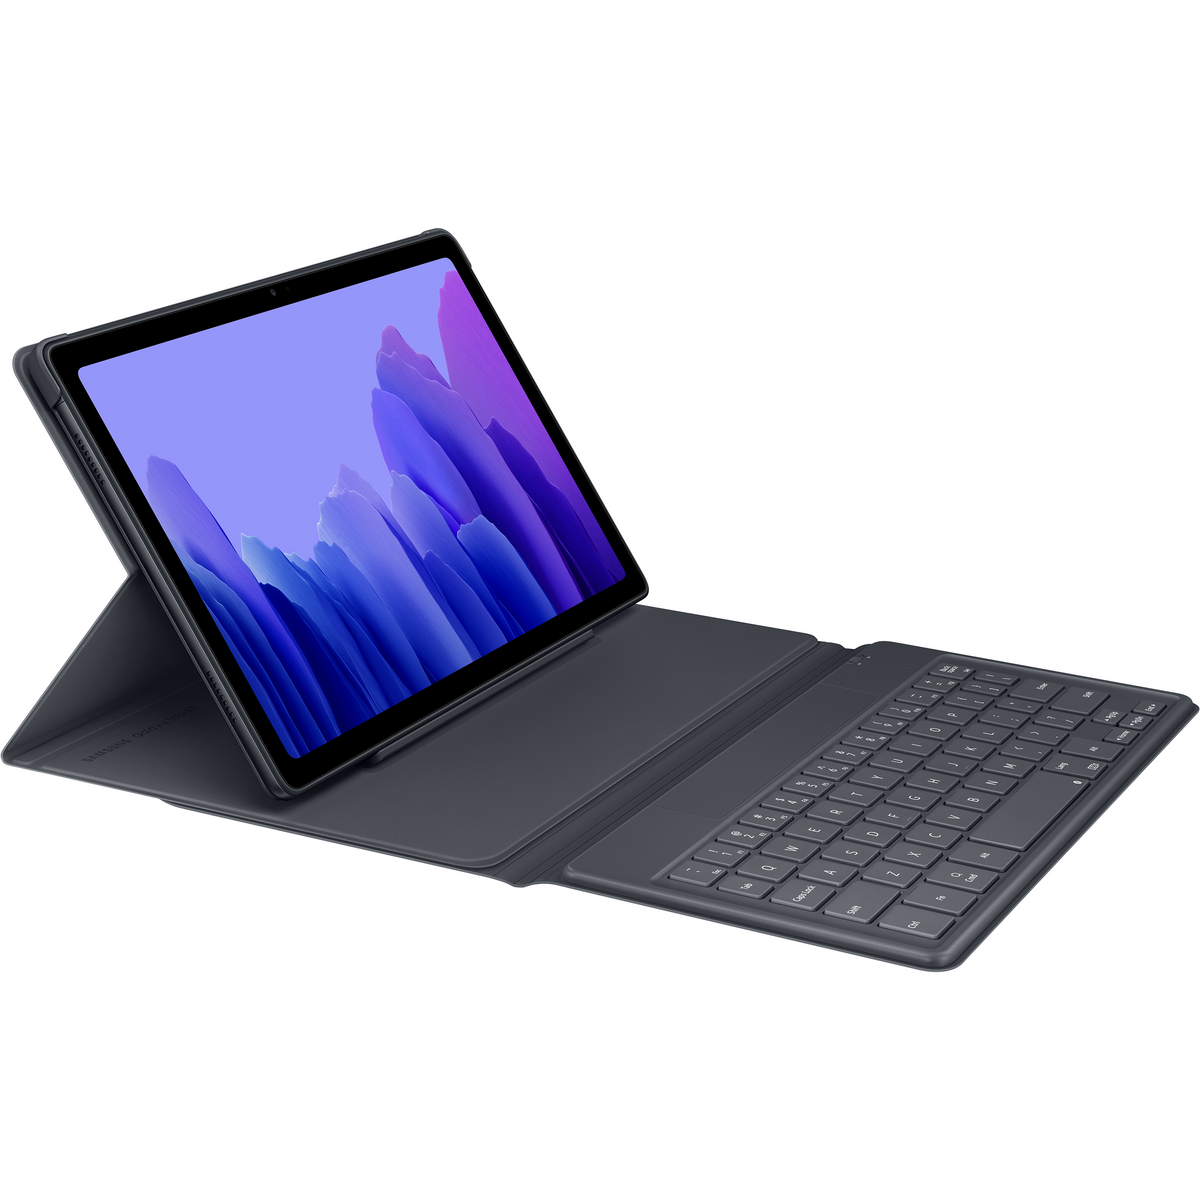 Samsung Book Cover Keyboard for Galaxy Tab A7 - Grey | 7288 from Samsung - DID Electrical